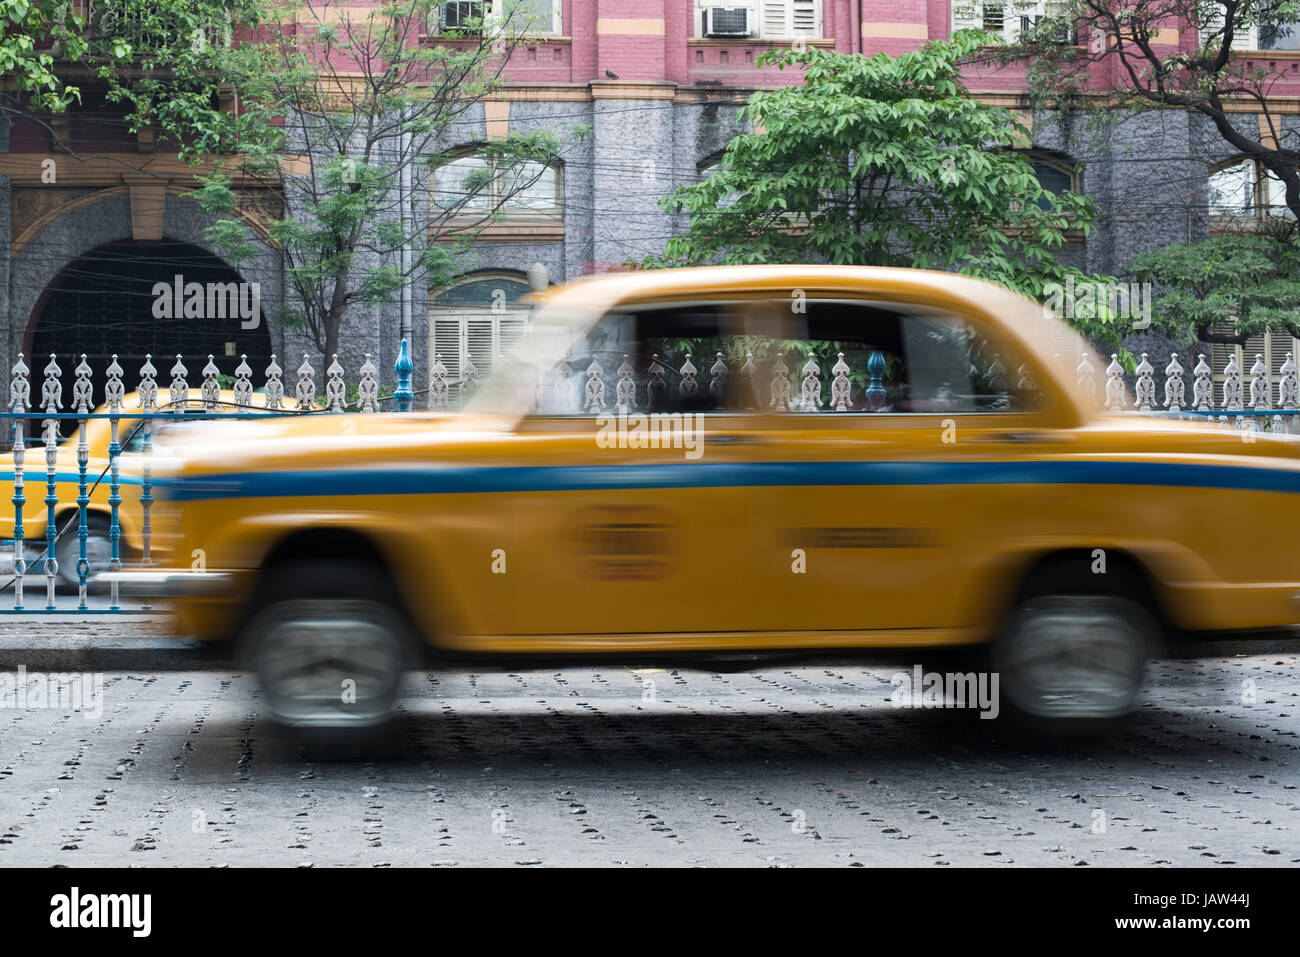 An iconic yellow taxi drives down a road in Kolkata (Calcutta), West Bengal, India Stock Photo